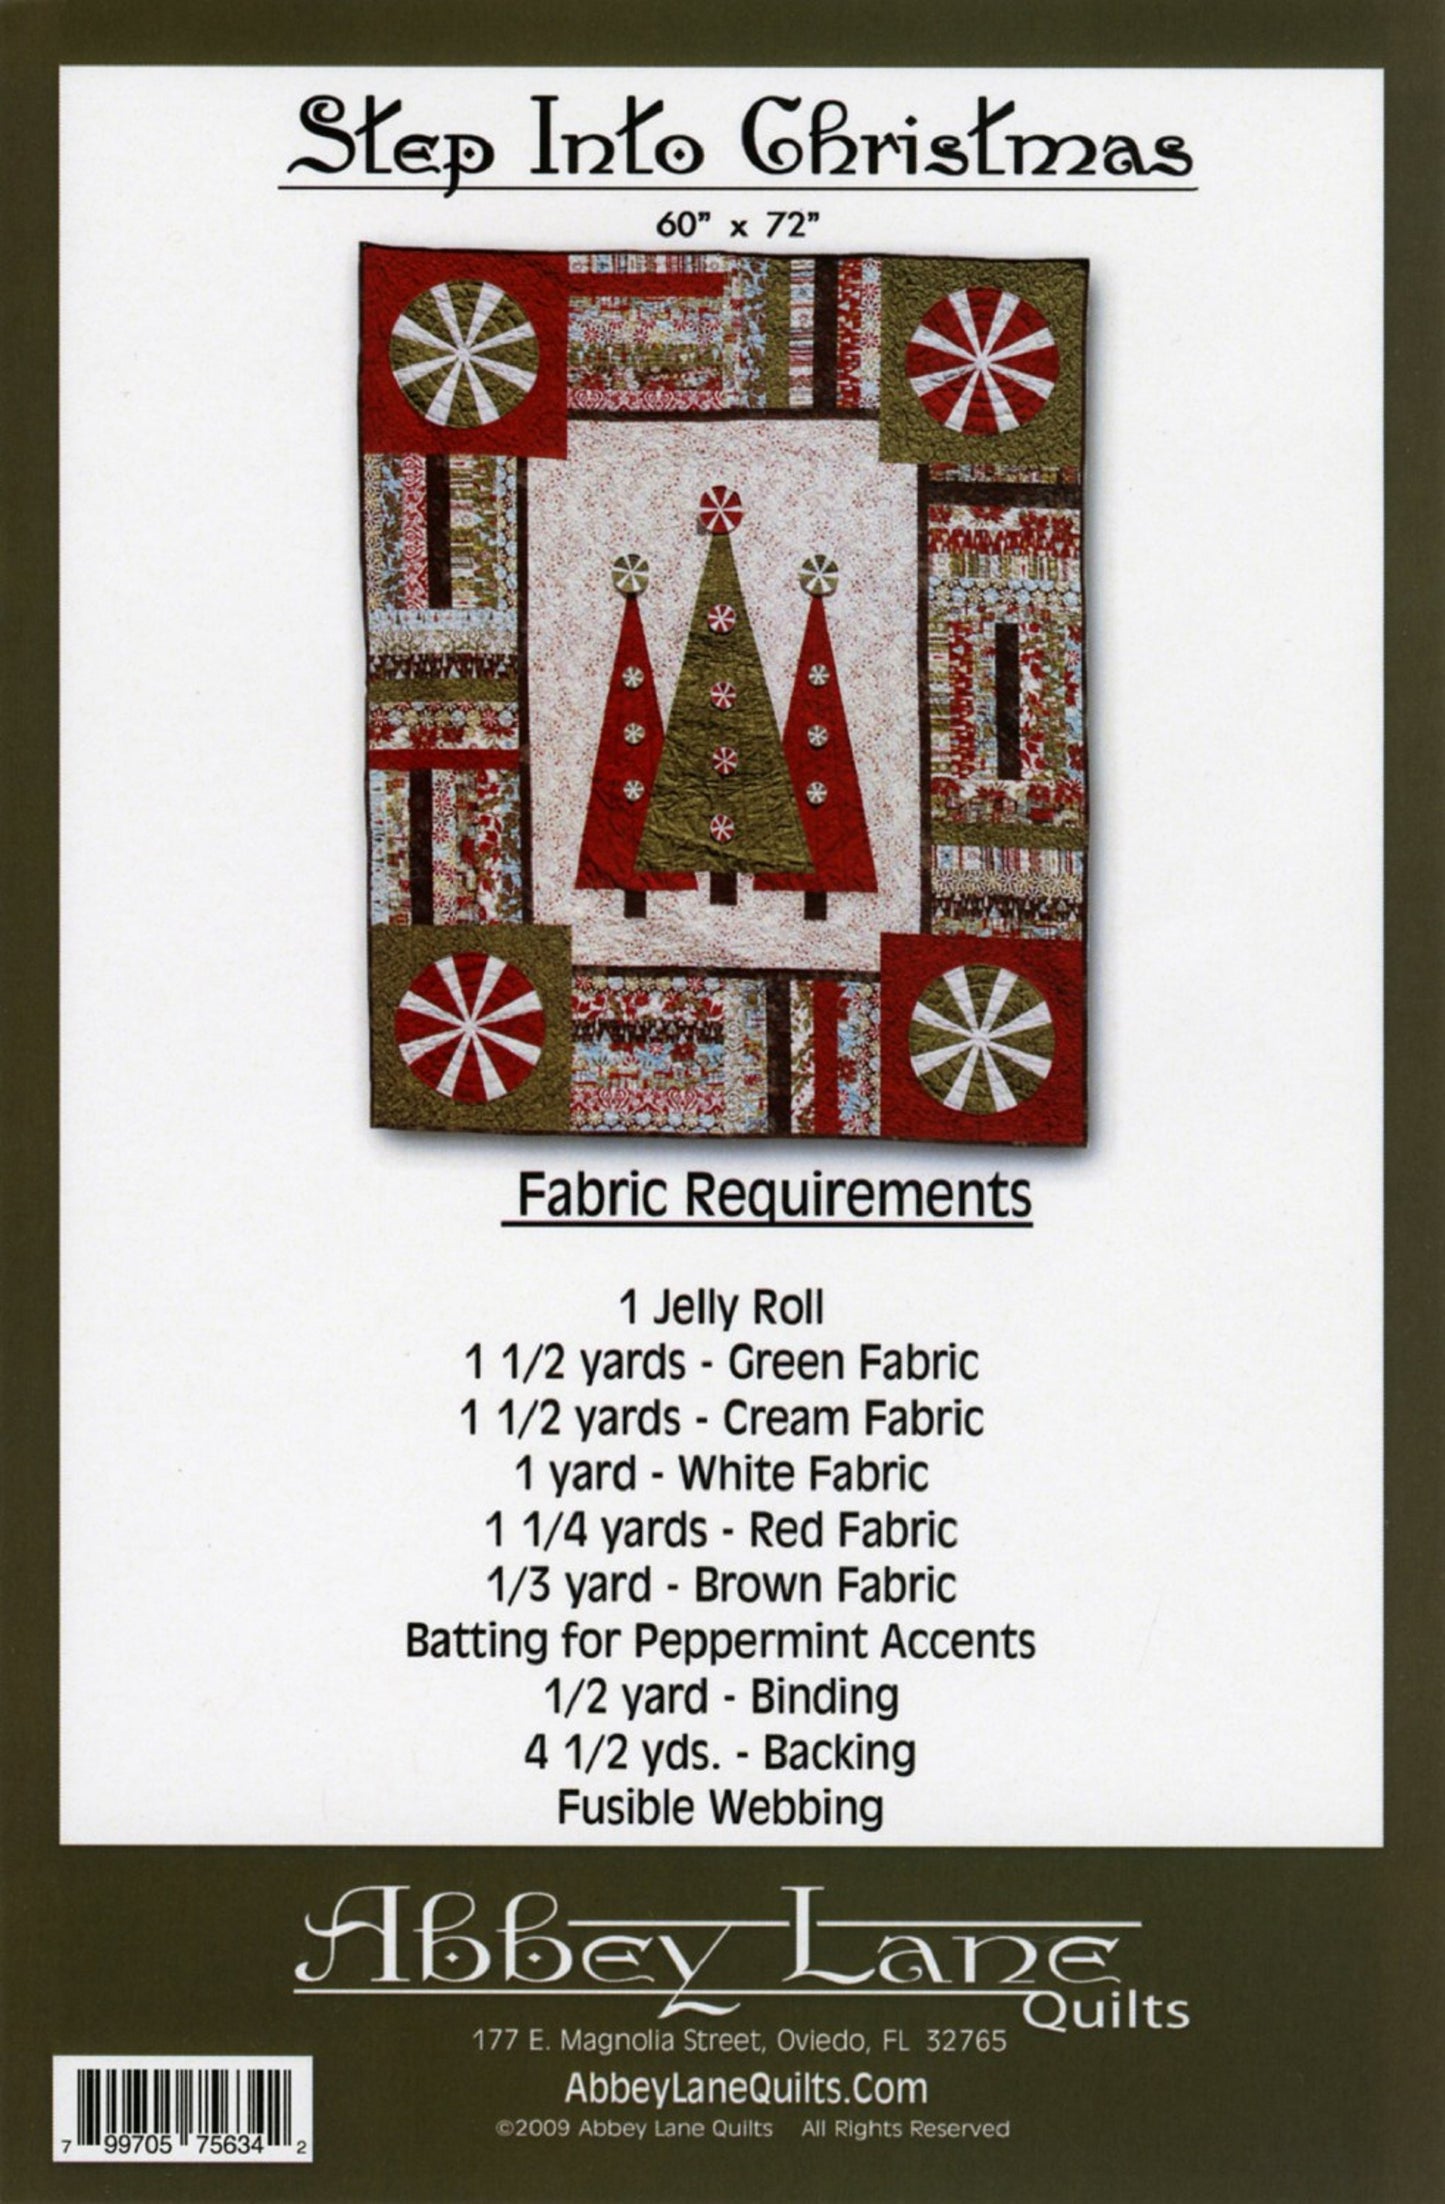 Step Into Christmas Quilt Pattern by Abbey Lane Quilts